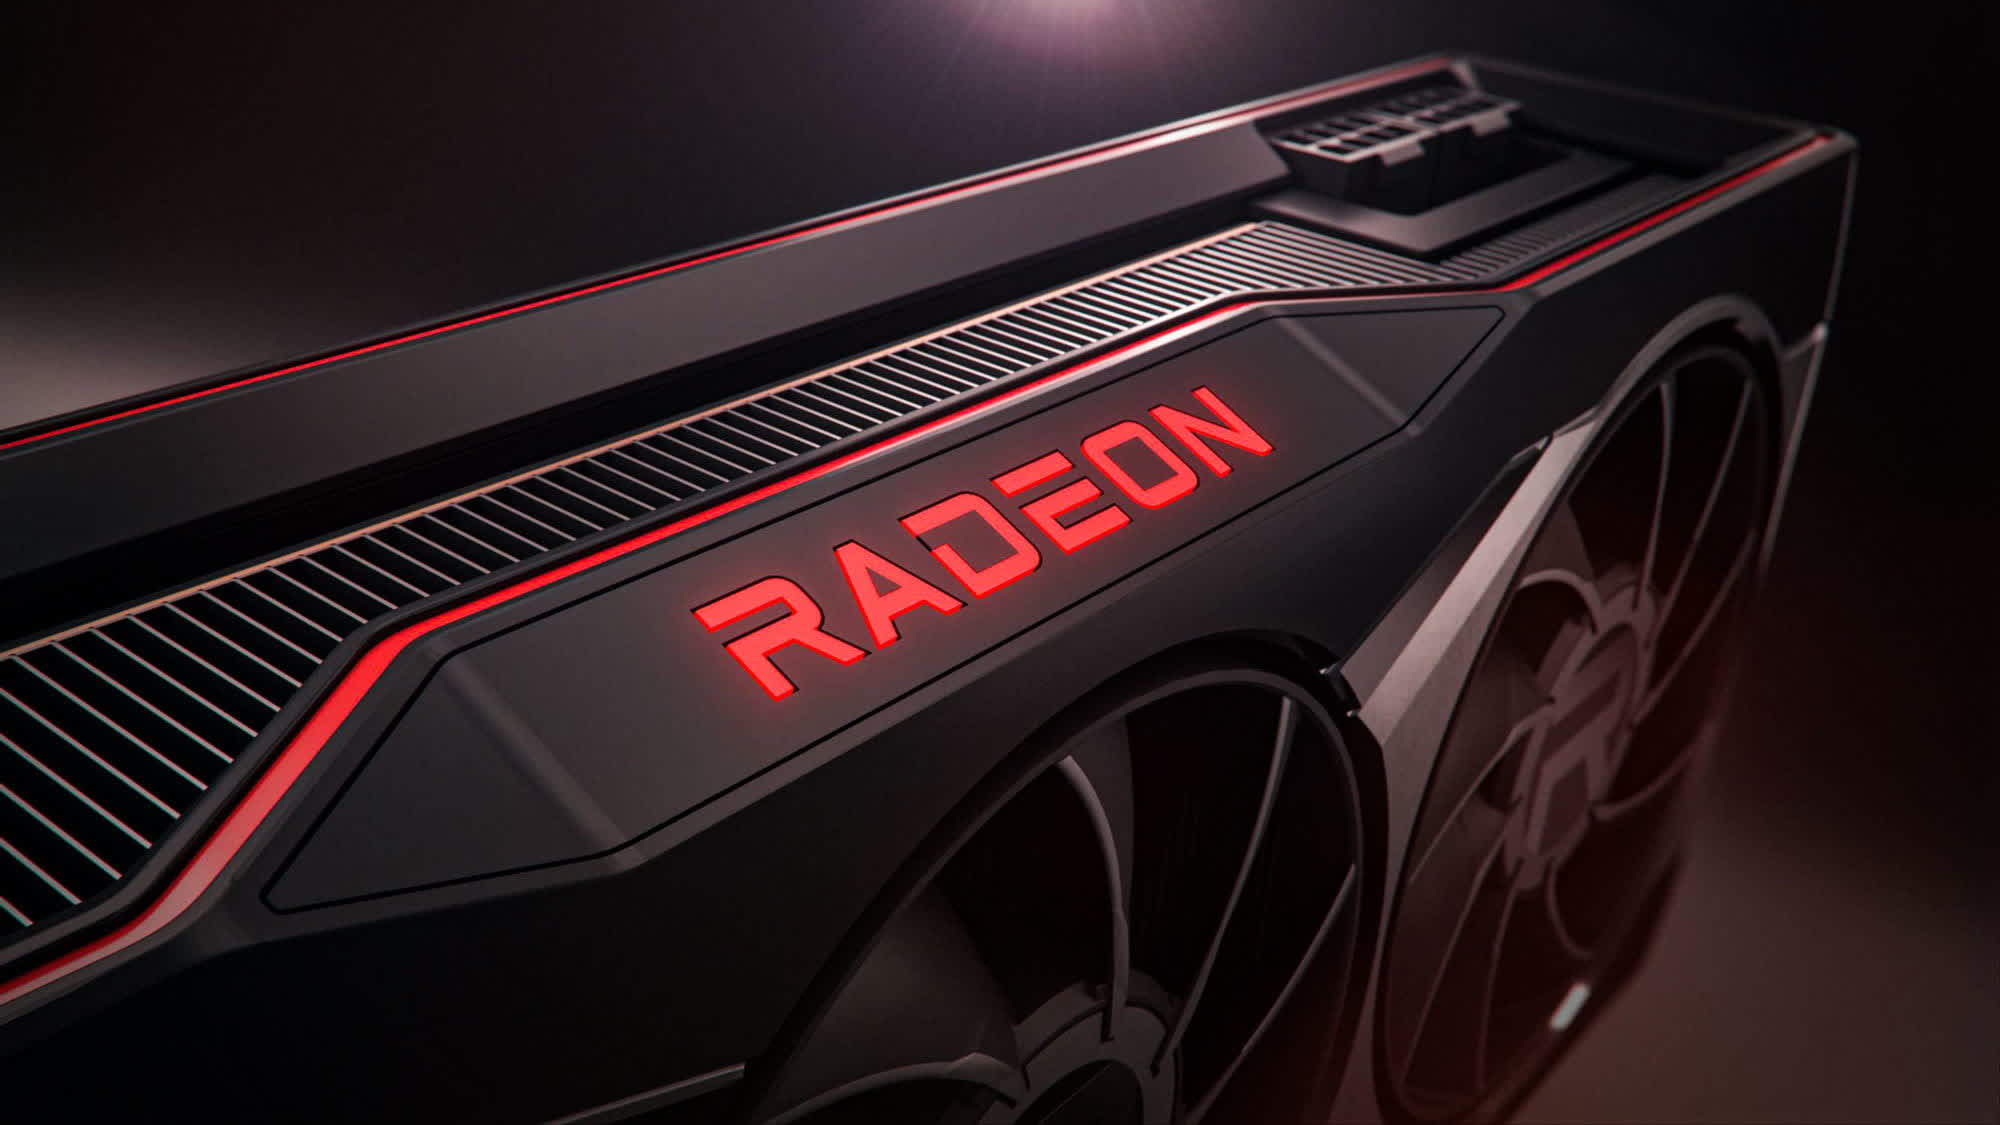 AMD Radeon RX 6x50 XT lineup specifications confirmed, plus some early benchmarks